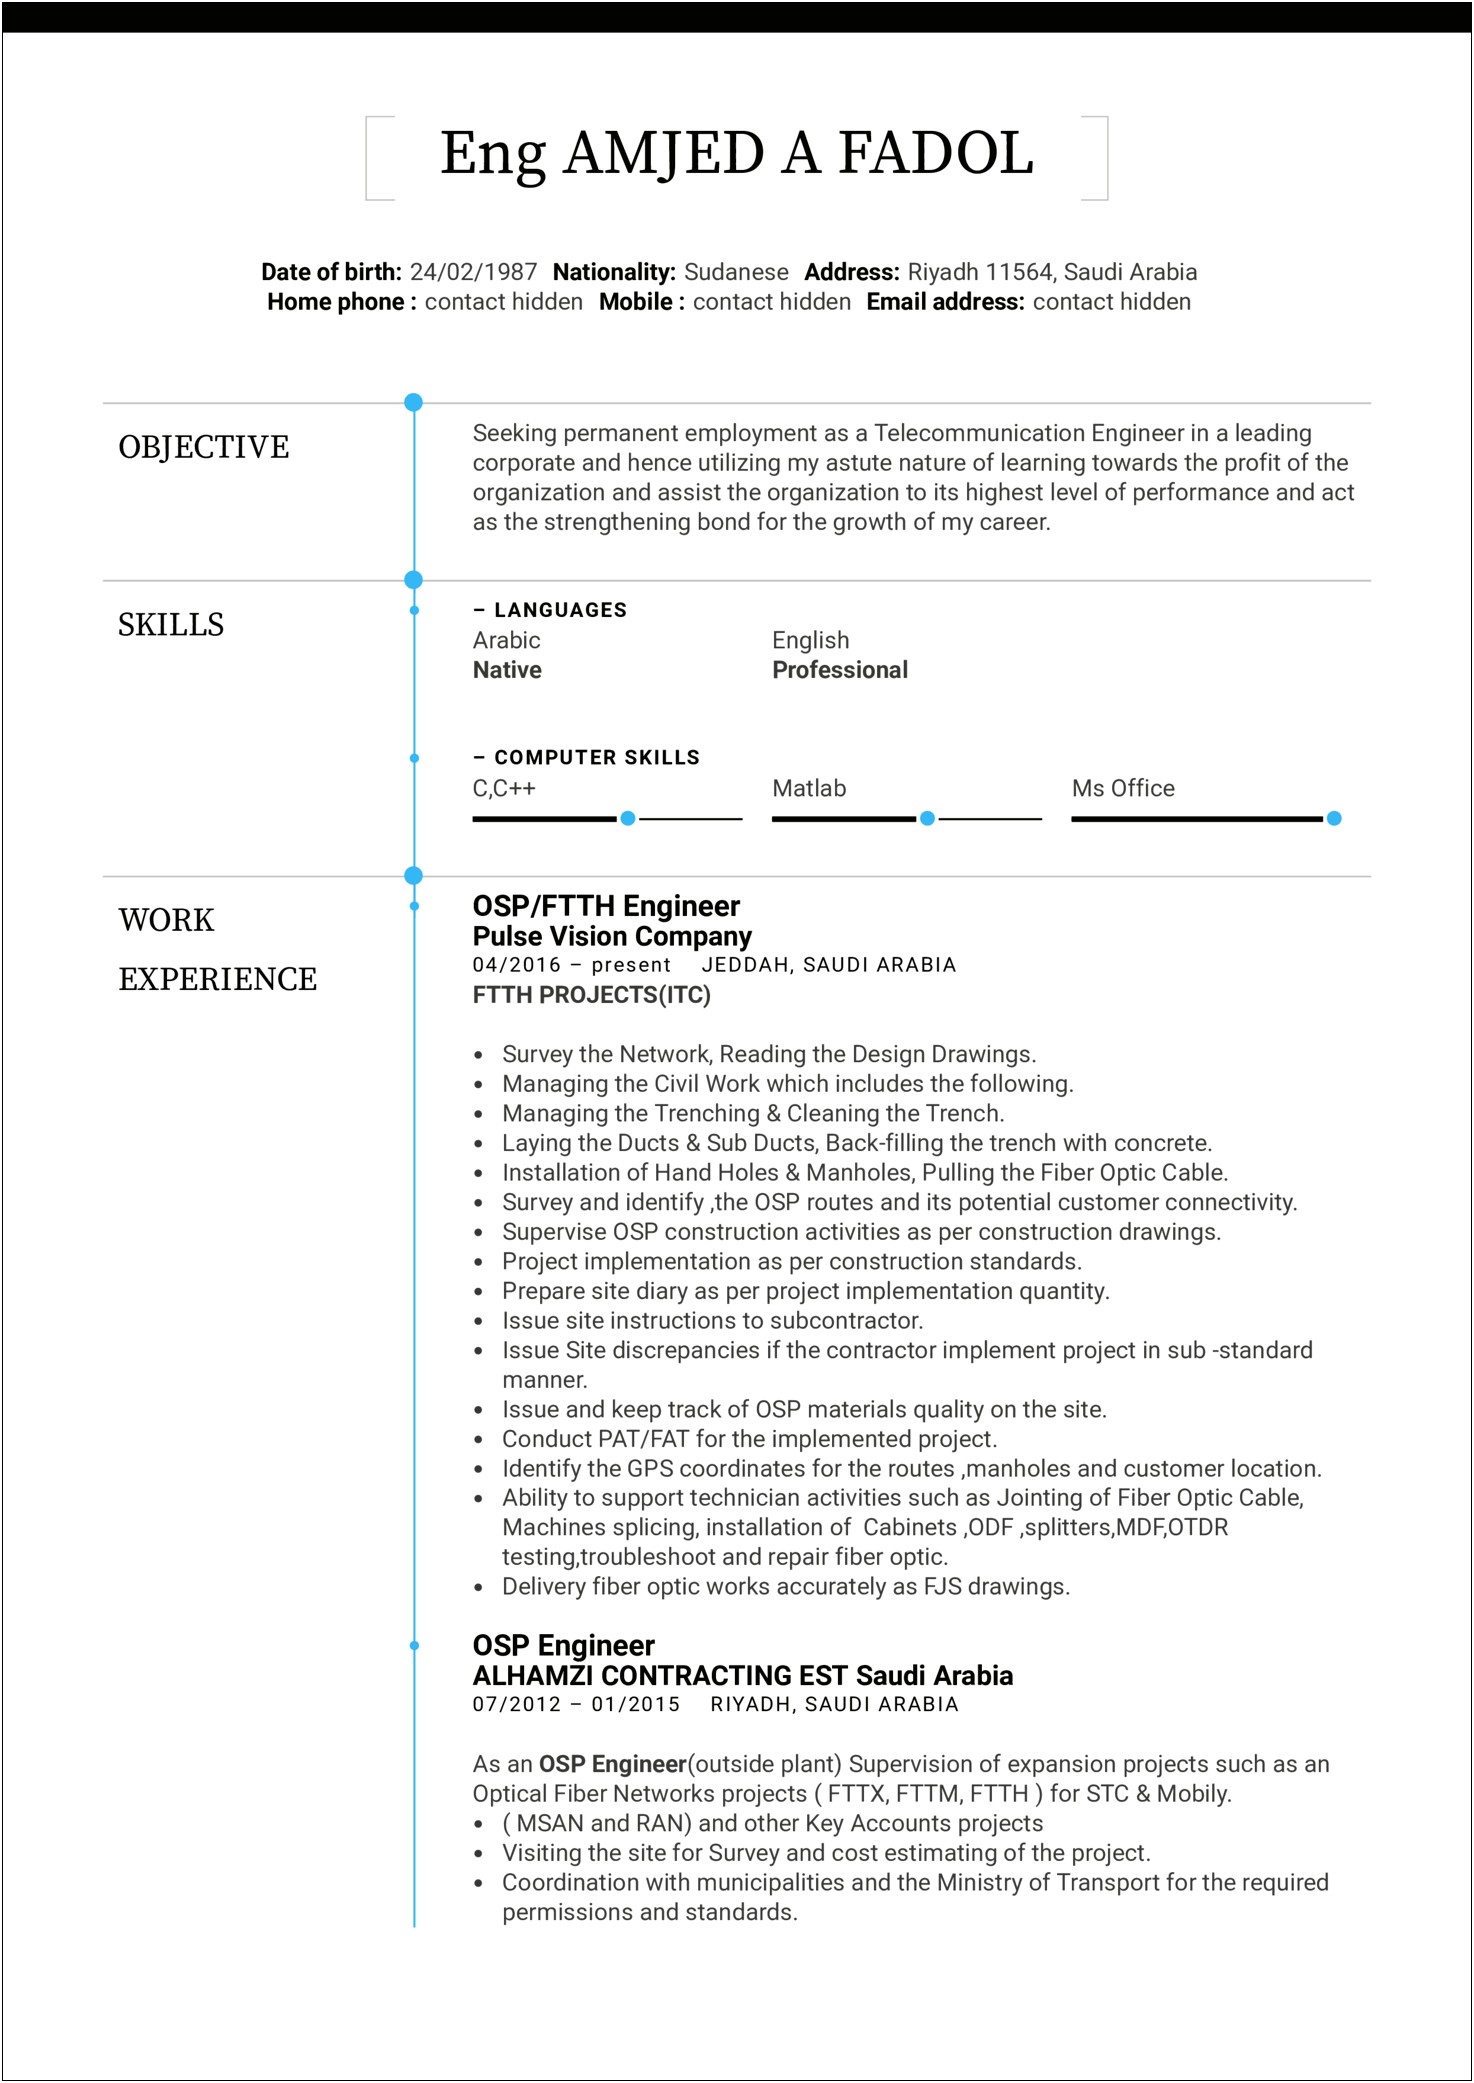 Fiber Optic Project Manager Resume